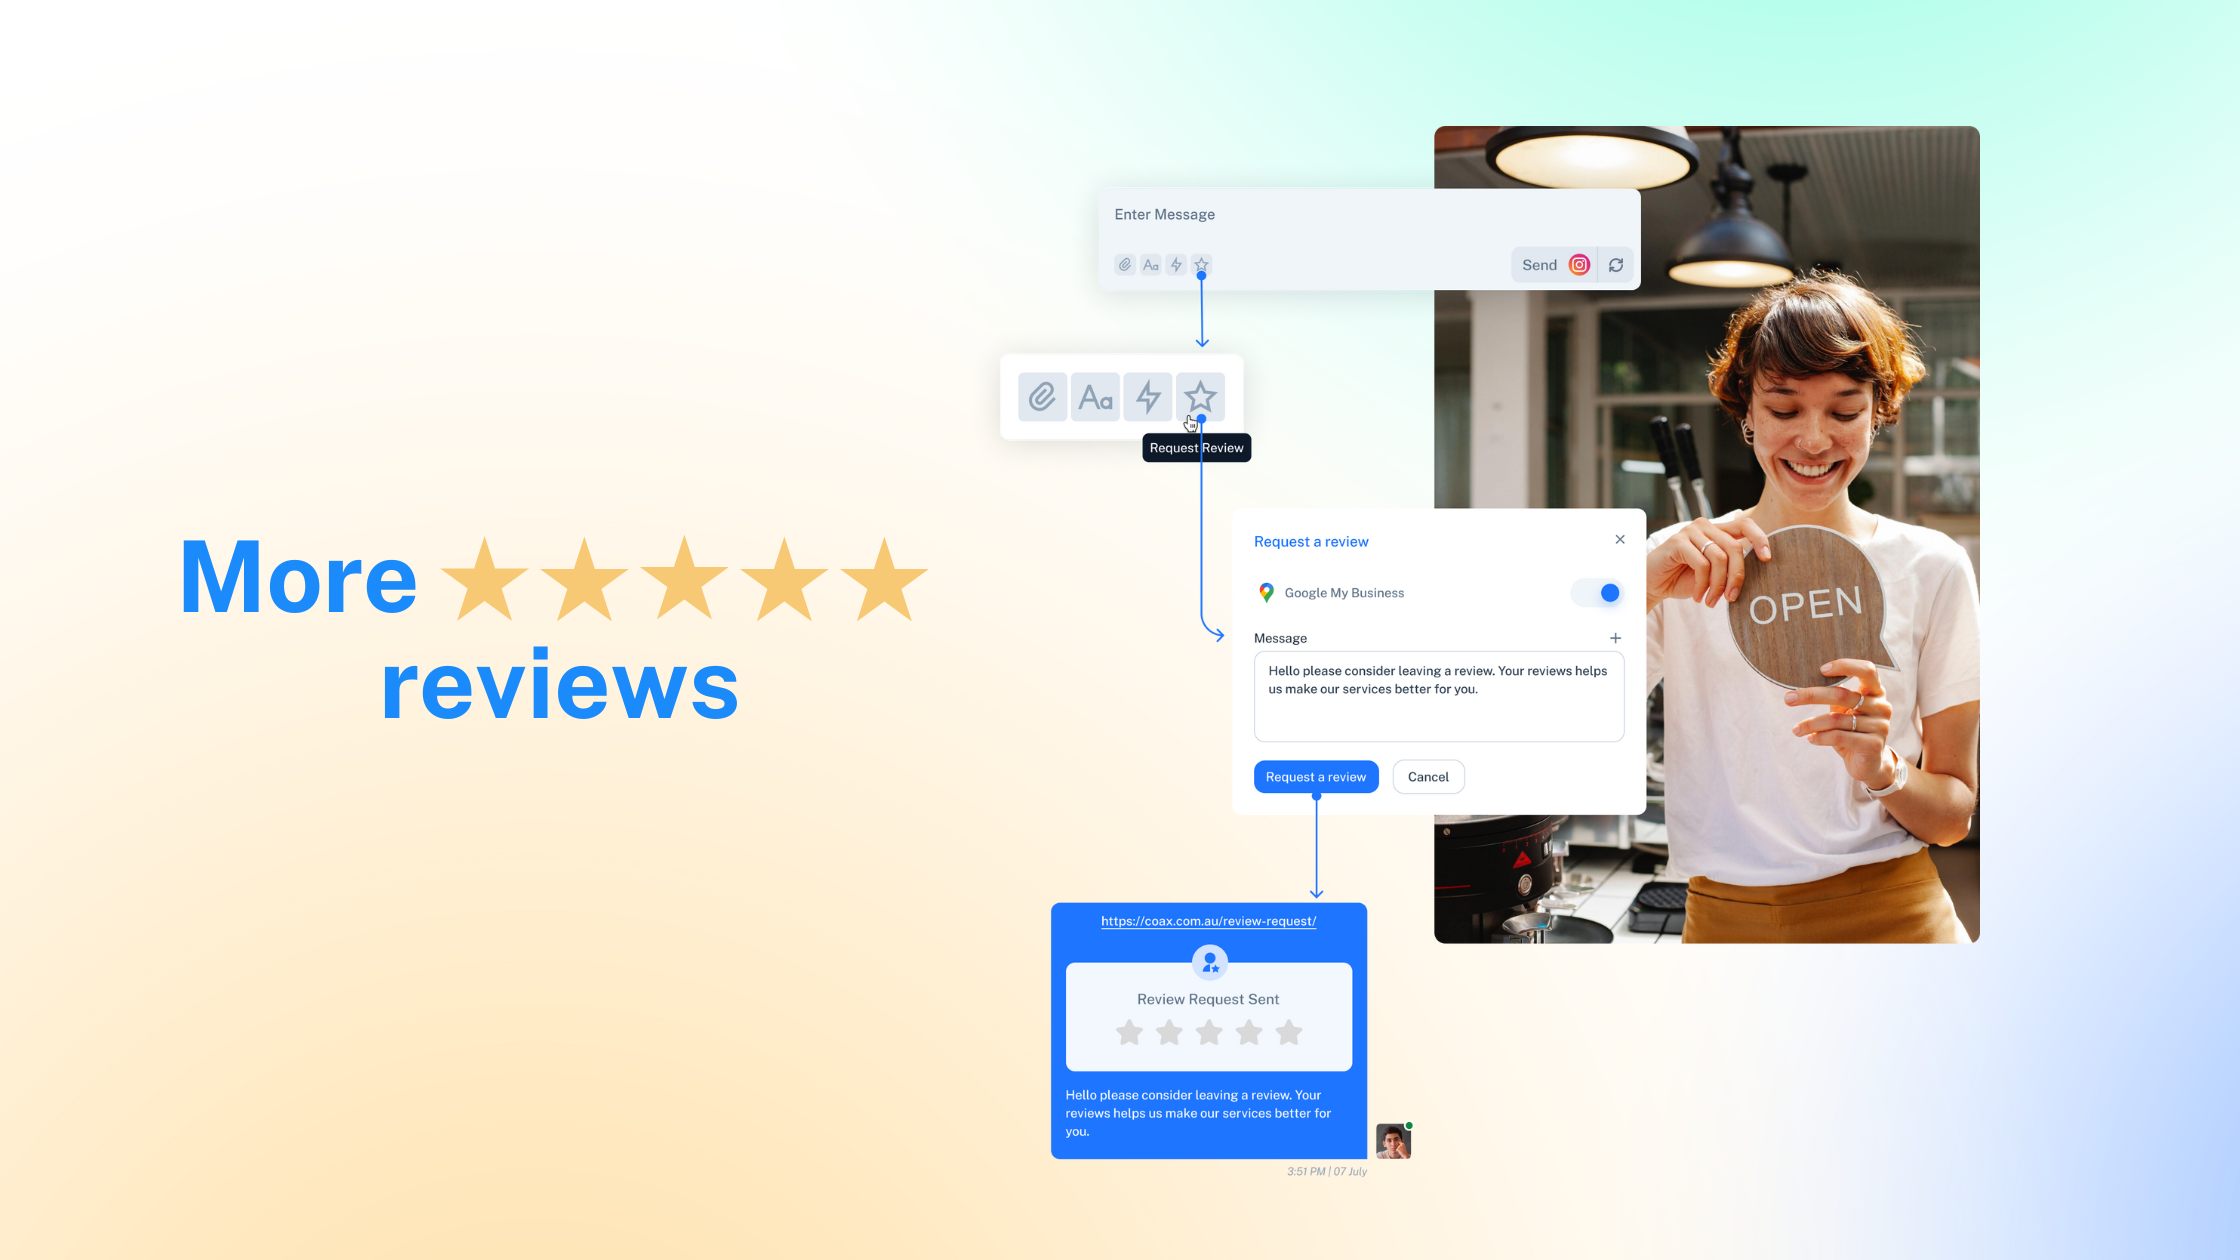 Coax simplifies reviews by having them in the chat so you can nurture your customer relationships even after your 5-star reviews come in. 